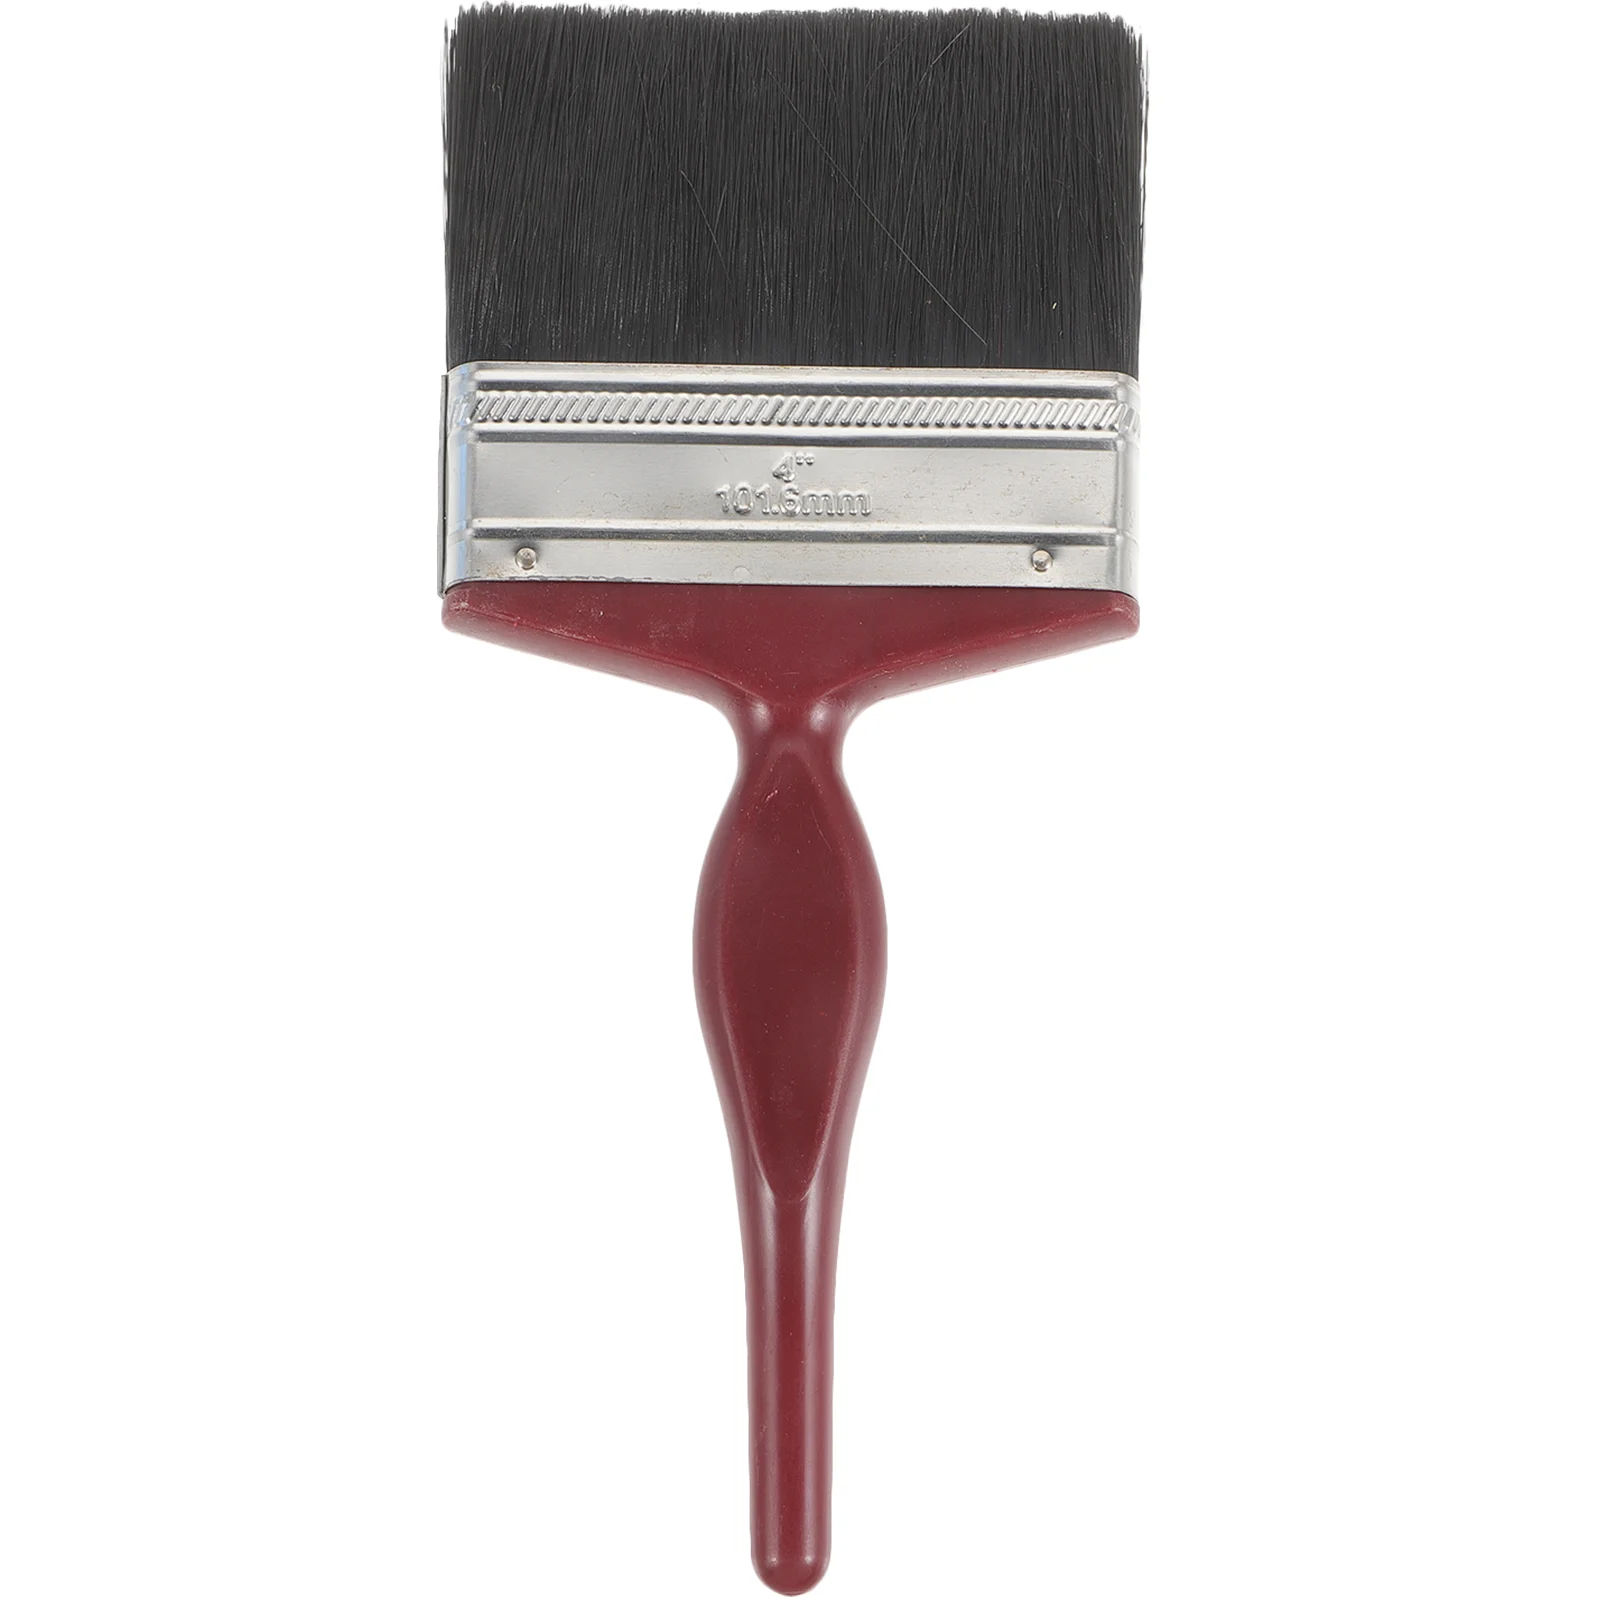 

Paint Brush Brushes Big Stain for Deck Wood Wooden Mixed Bristle Plastic Applicator Walls